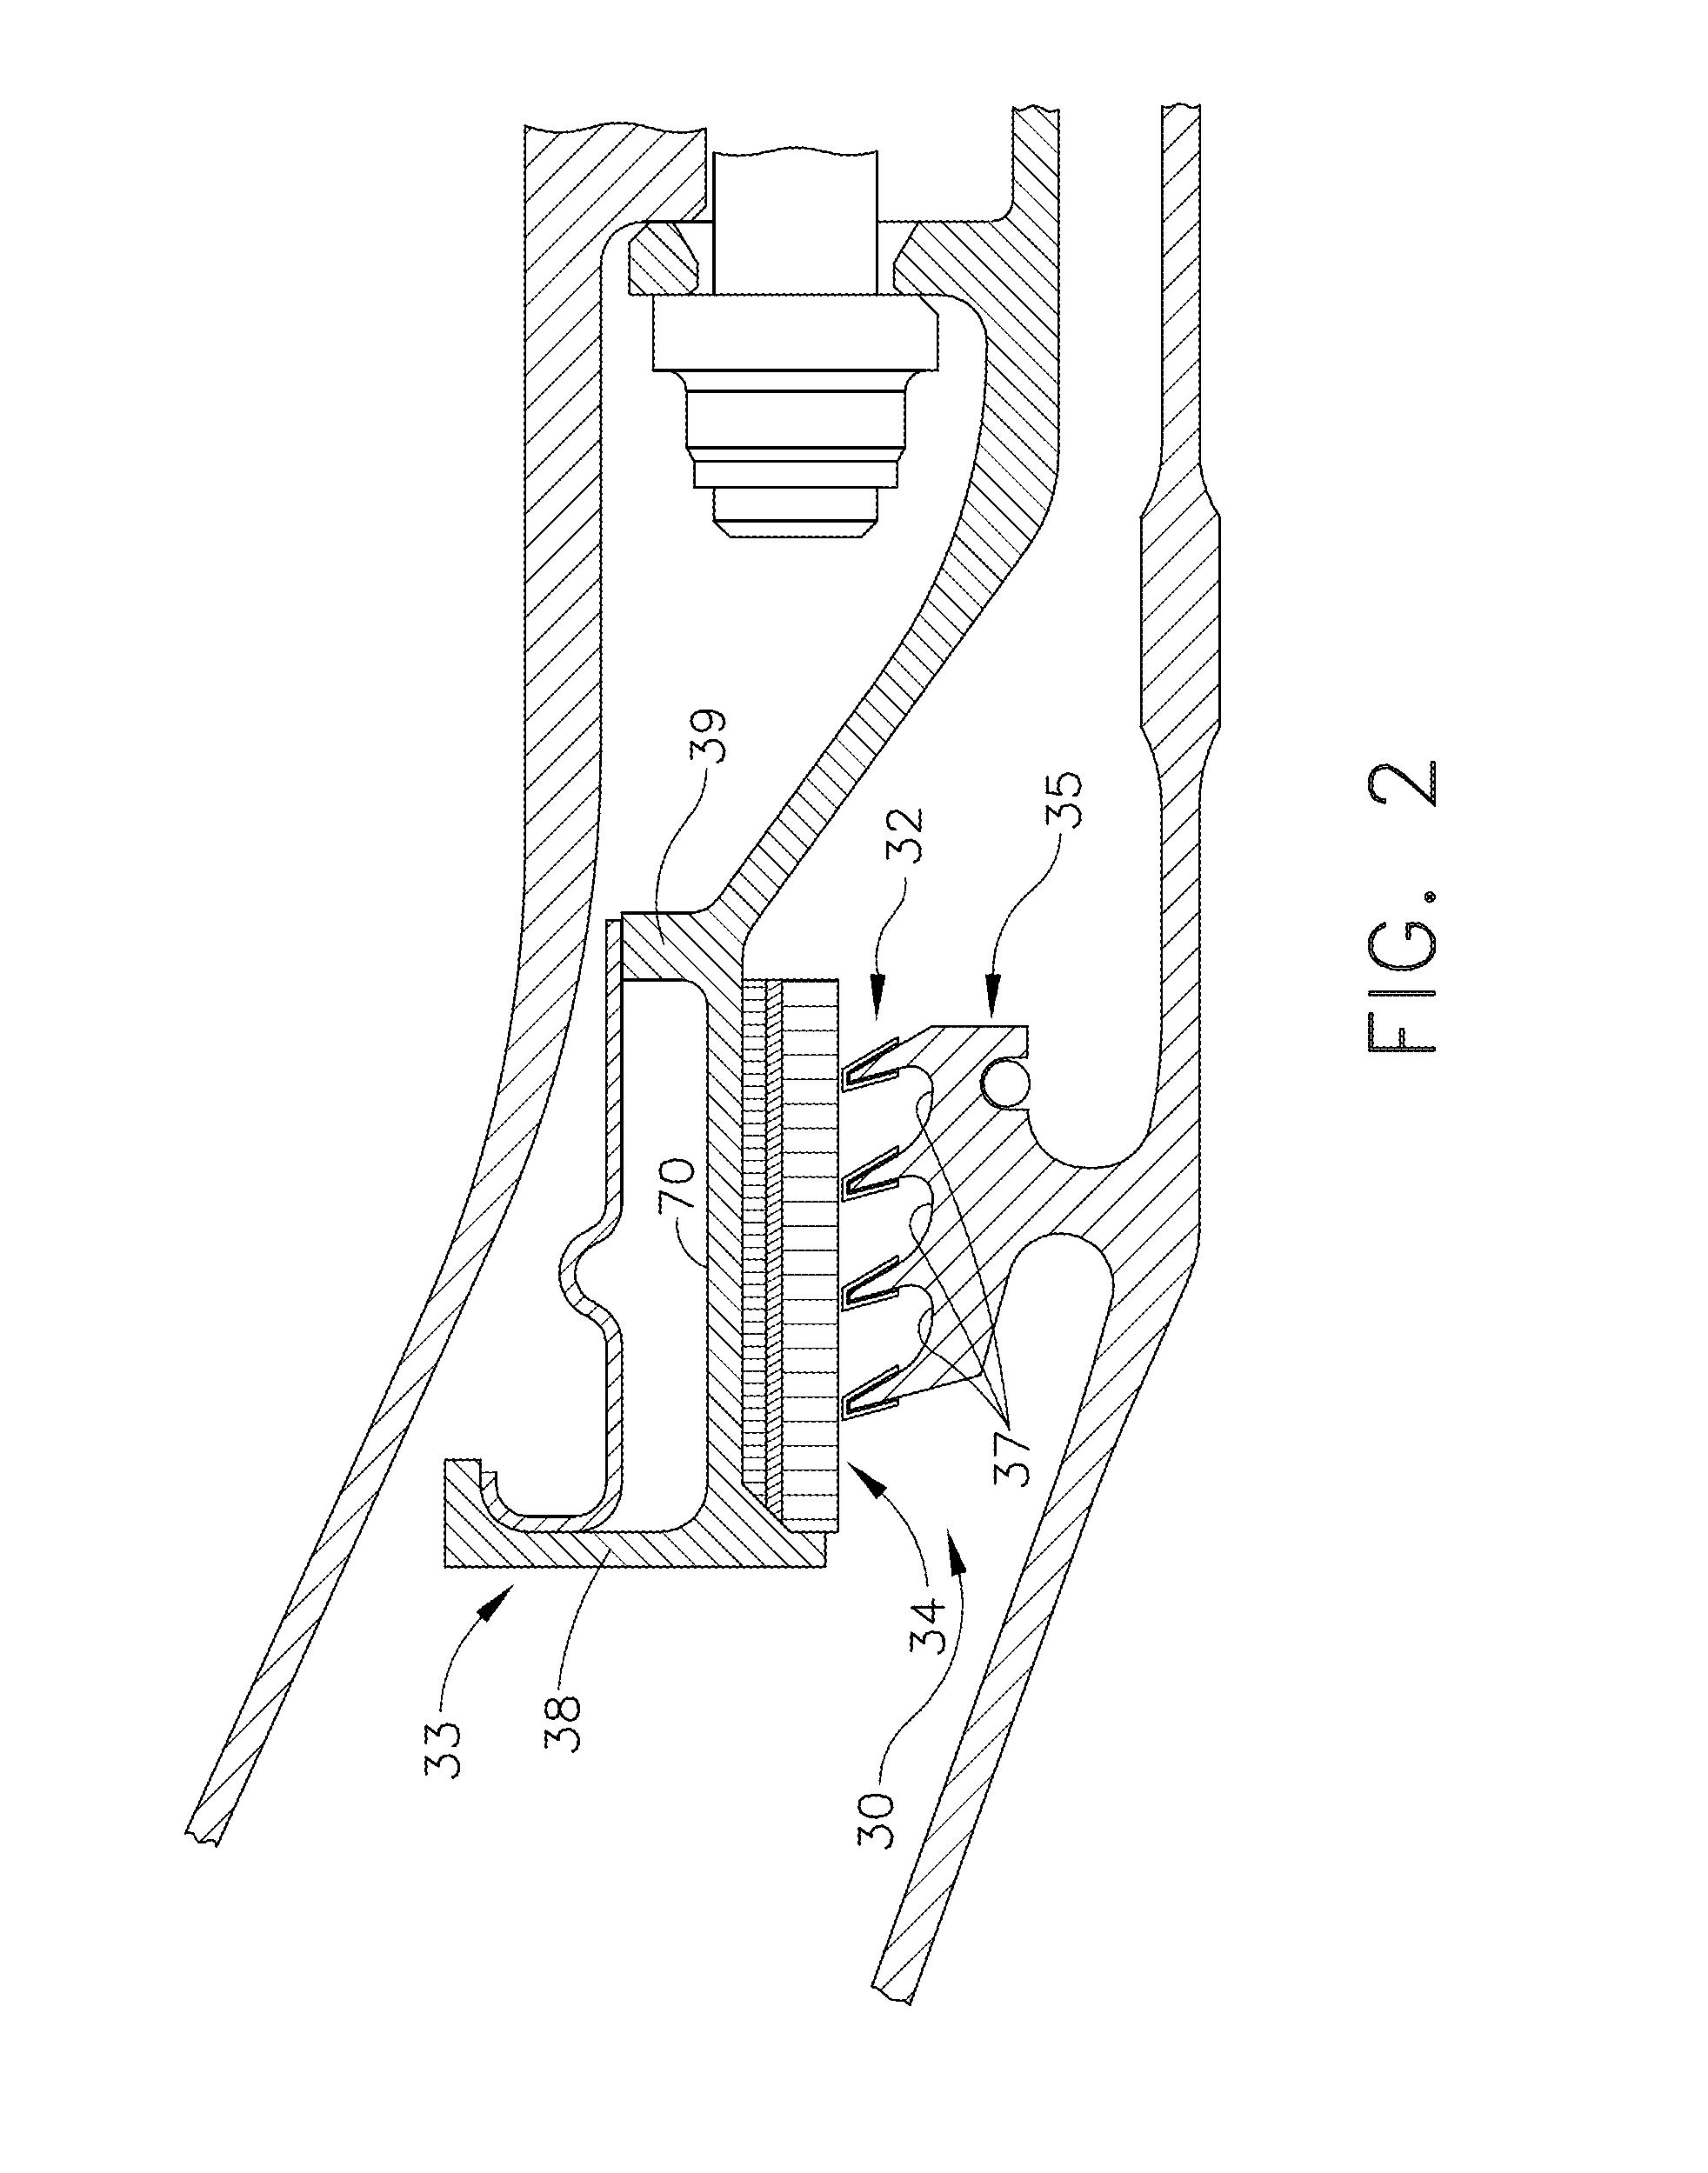 Gas turbine laminate seal assembly comprising first and second honeycomb layer and a perforated intermediate seal plate in-between